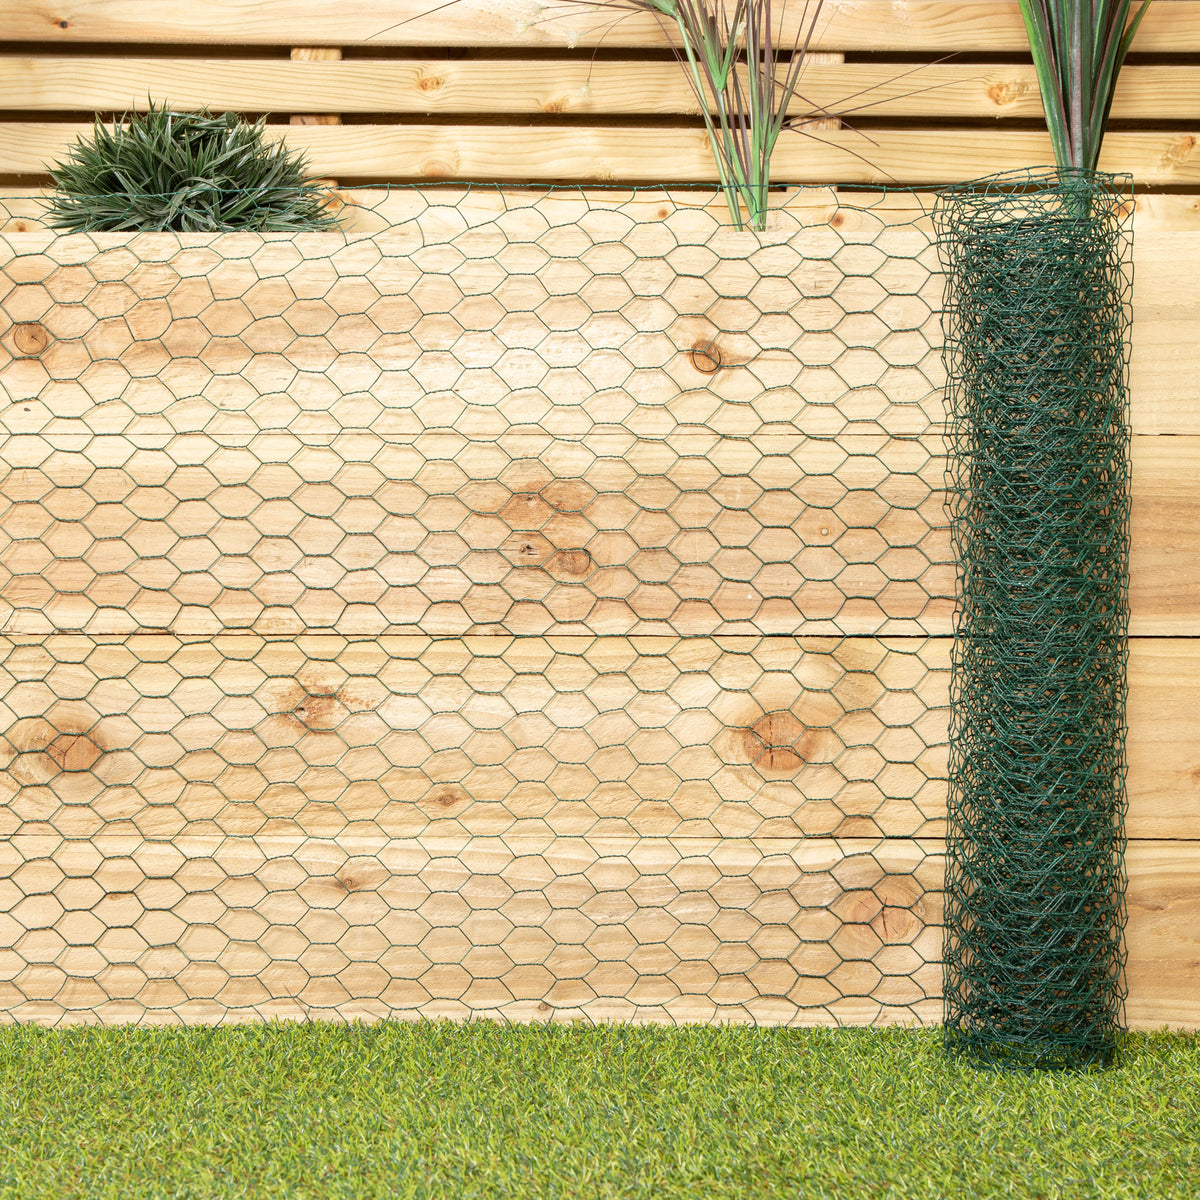 5m x 0.6m x 25mm Green PVC Coated Galvanised Chicken Garden Wire Netting / Fencing